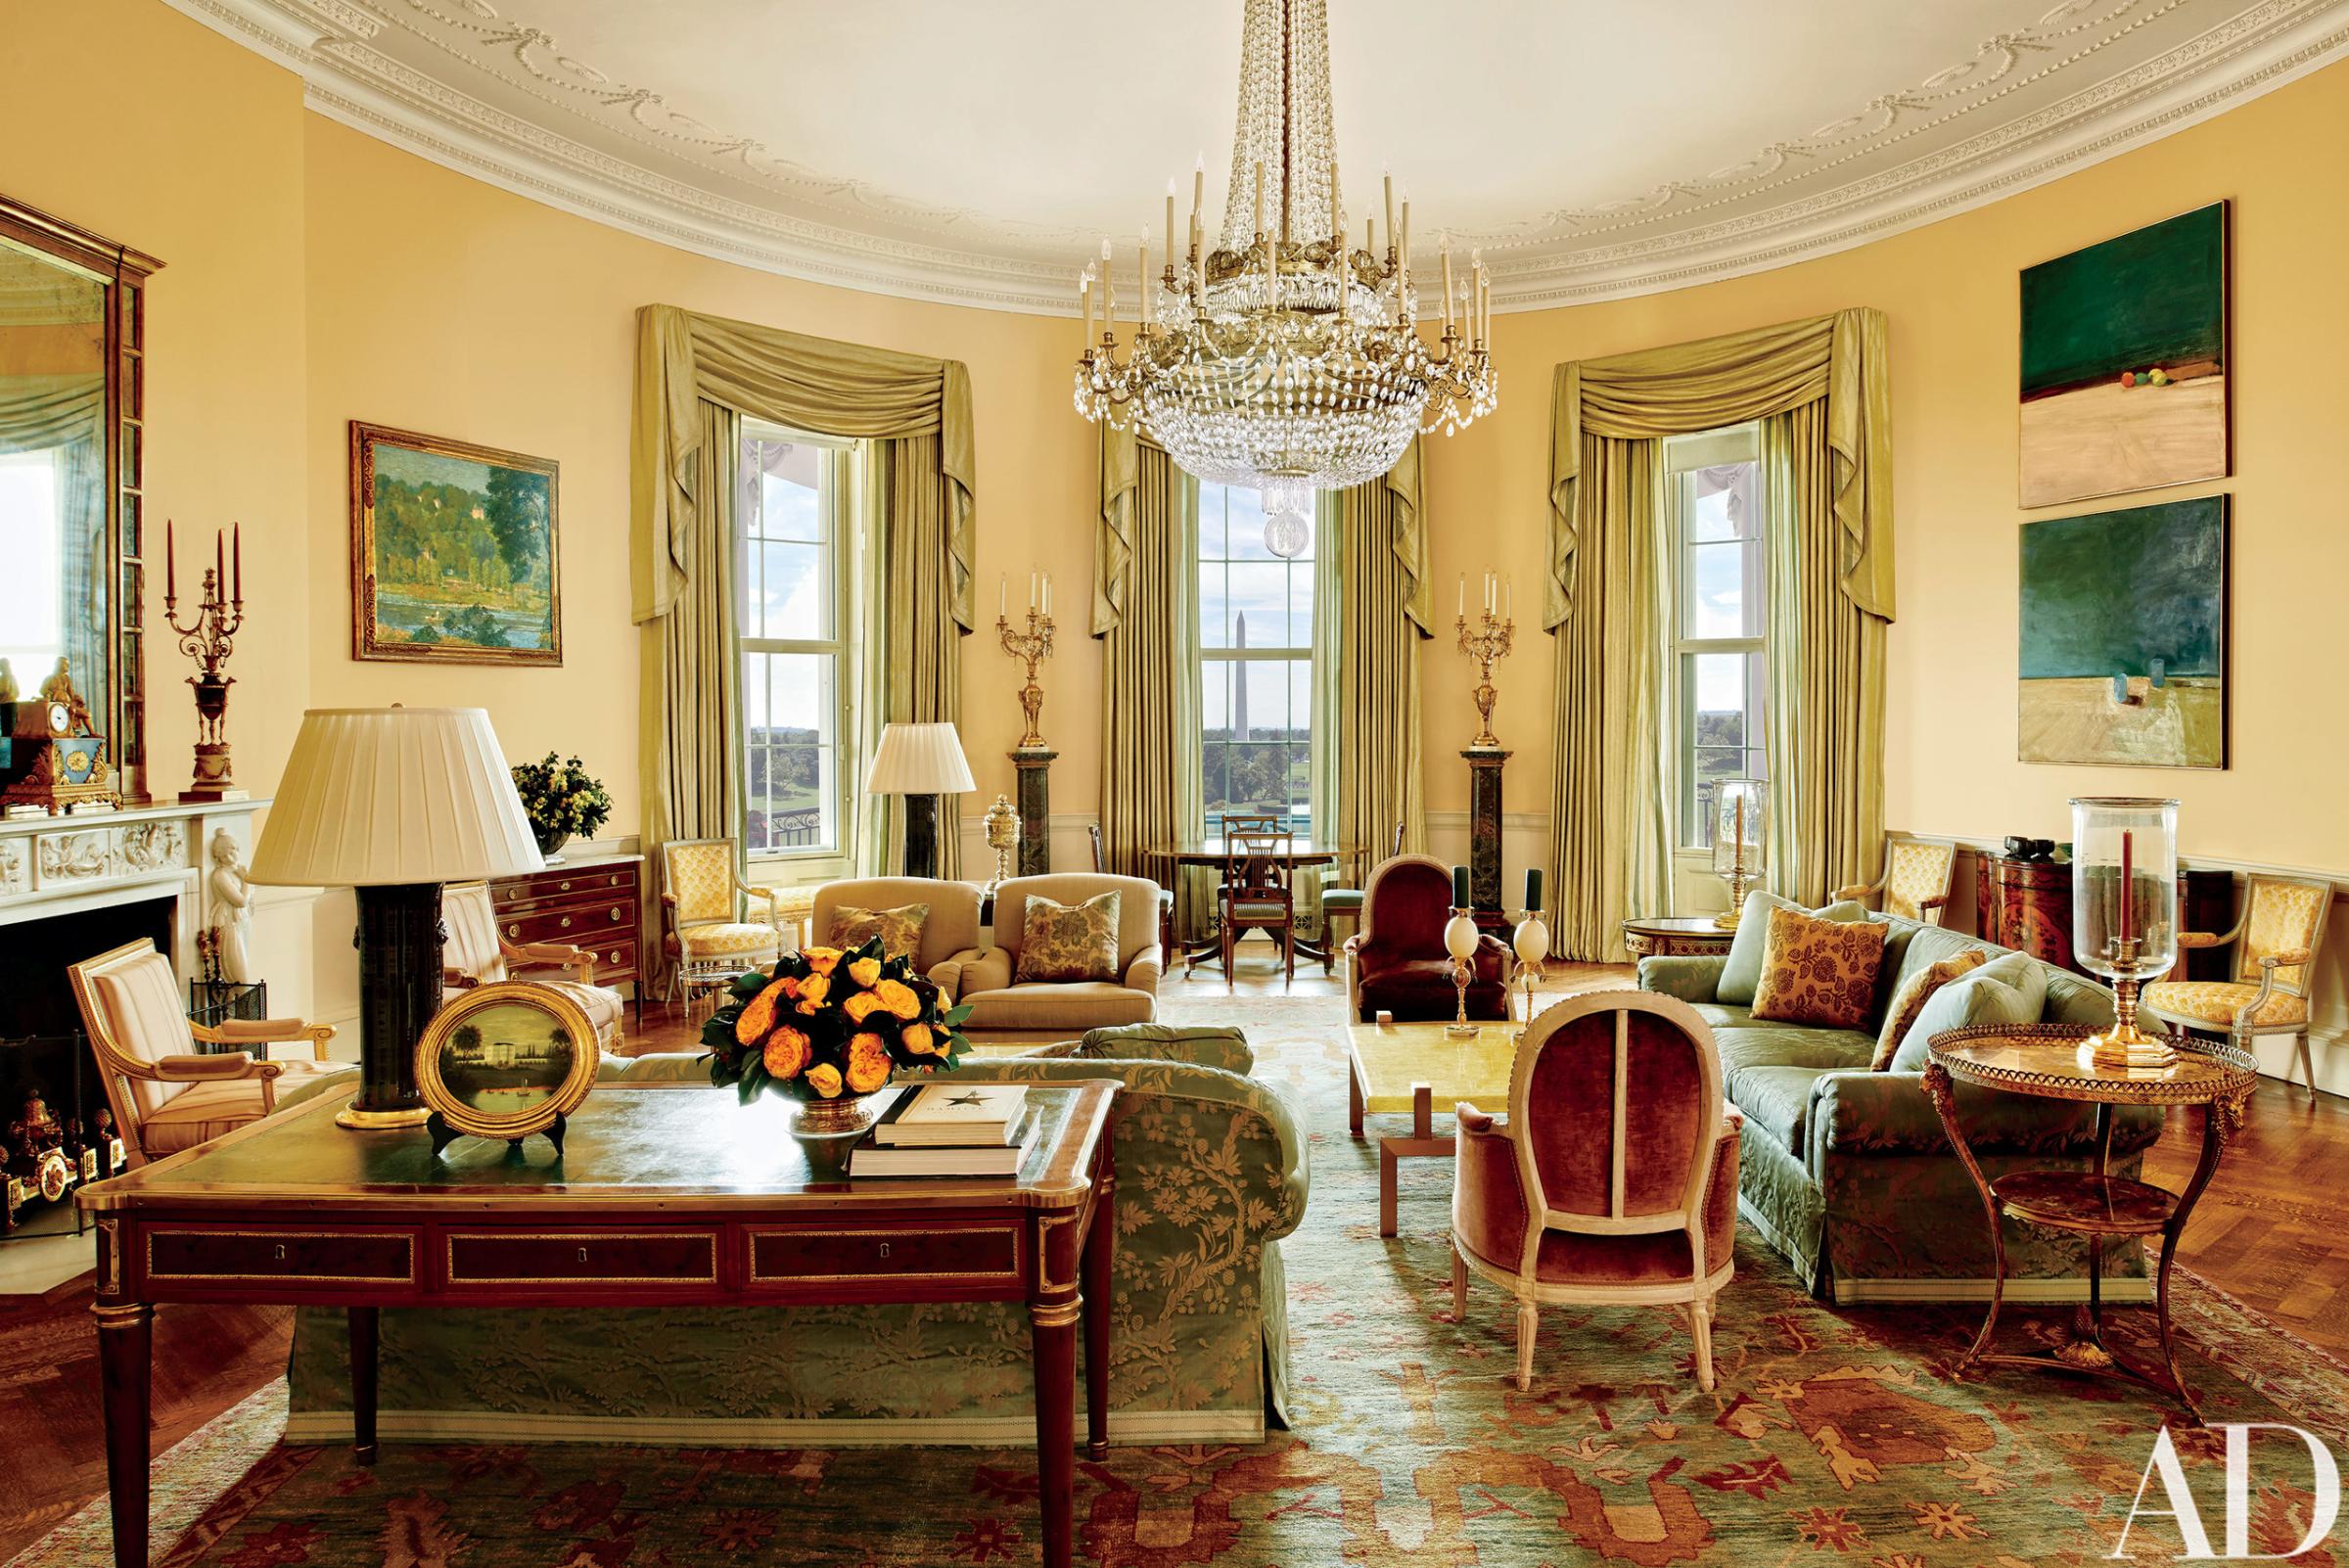 The Yellow Oval Room in the White House in Washington. Designer Michael S. Smith specified a Donald Kaufman paint for the Yellow Oval Room. Artworks by Paul Cézanne and Daniel Garber flank the mantel. Smith mellowed the Yellow Oval Room with smoky browns, greens, golds, and blues. The 1978 Camp David peace accords were signed at the antique Denis-Louis Ancellet desk, front left.